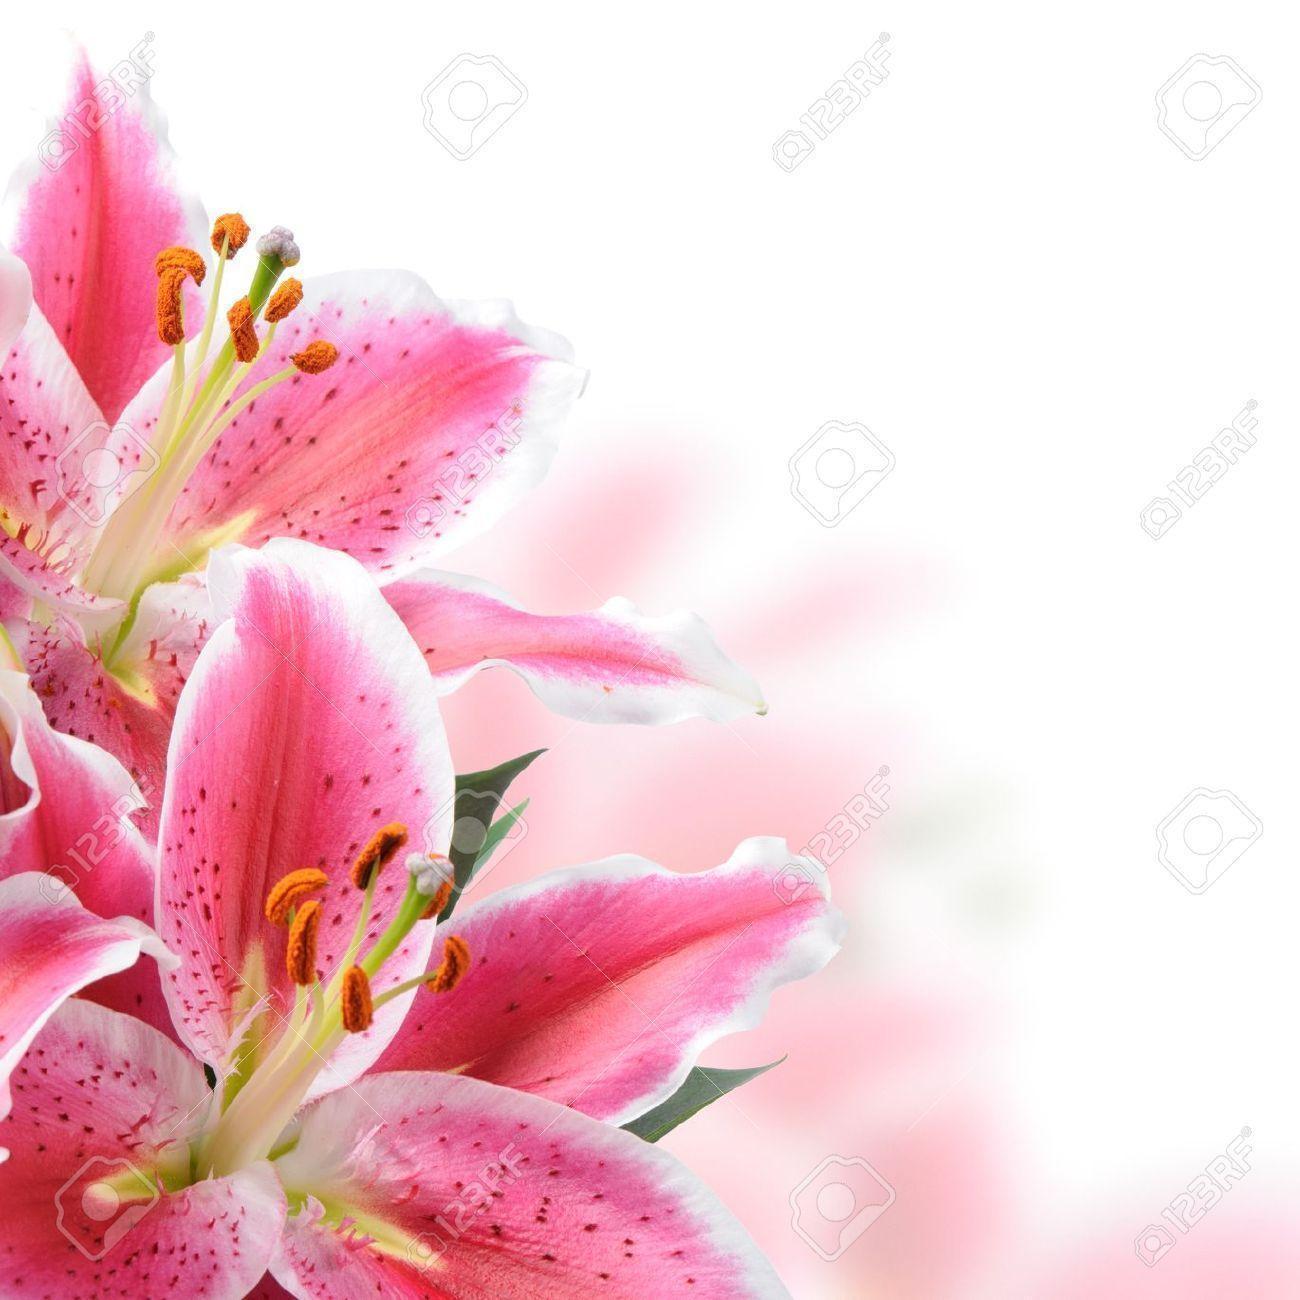 Tiger Lily Image, Royalty Free Tiger Lily Image